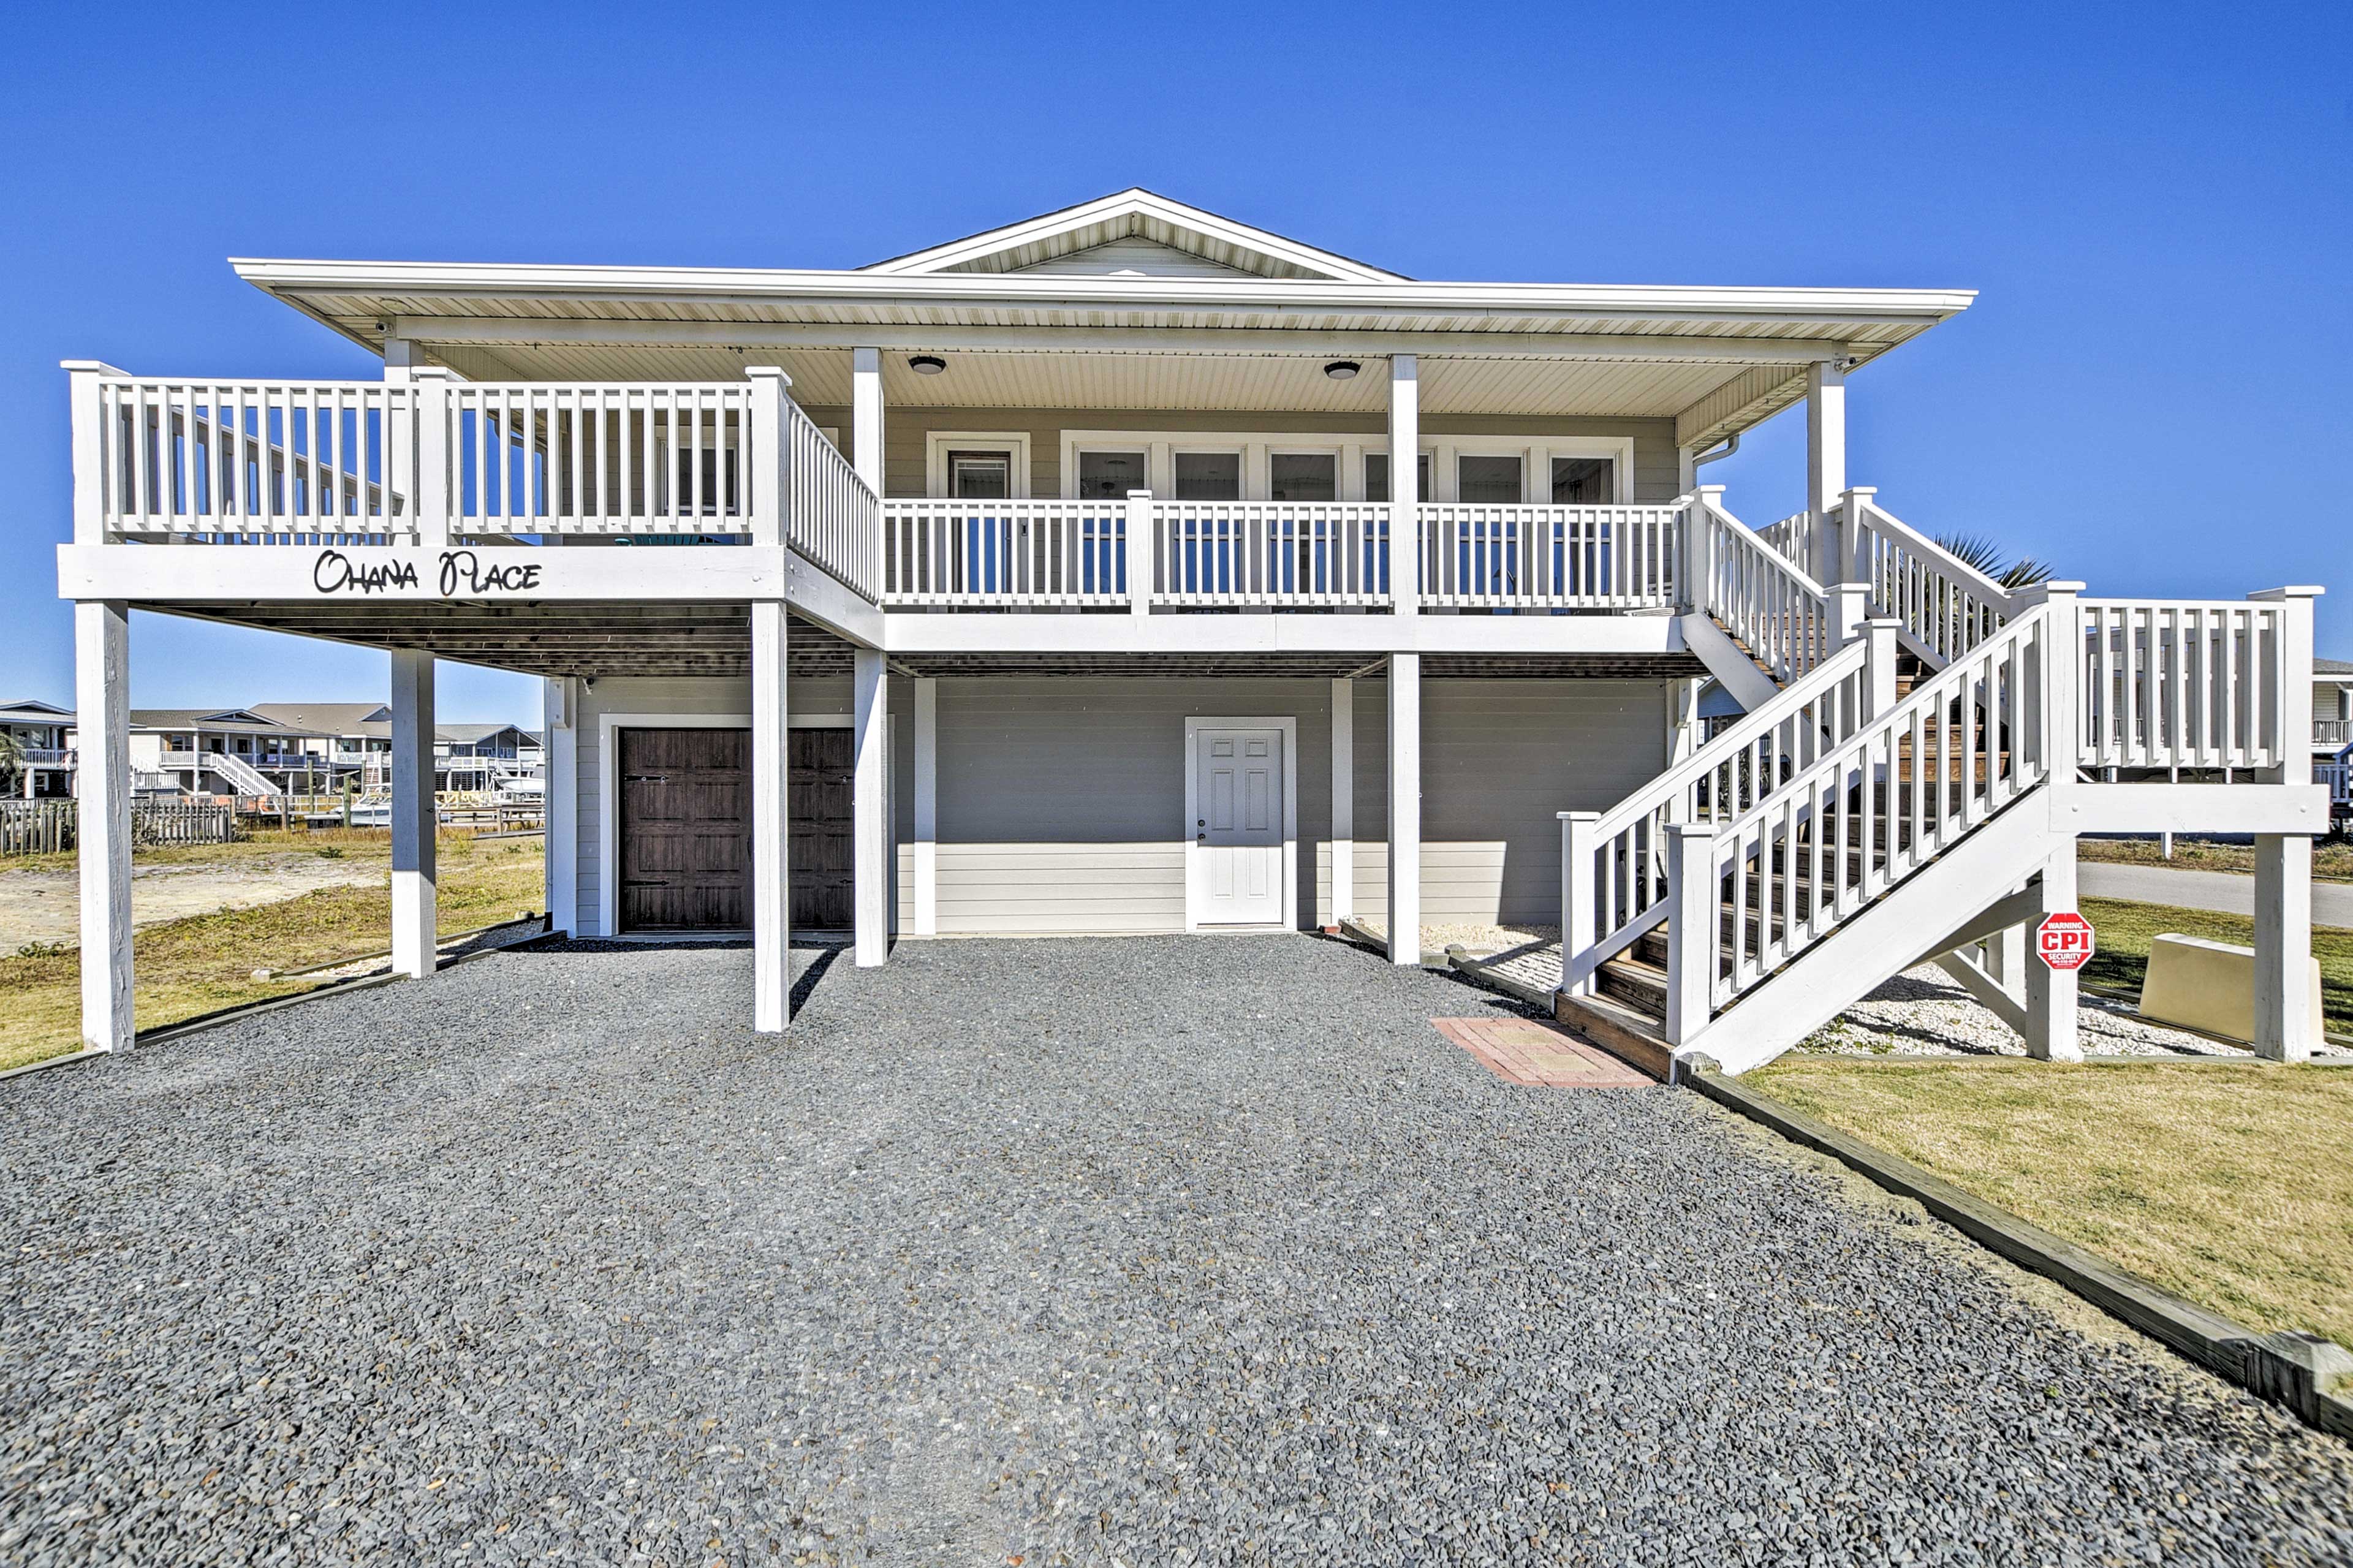 Property Image 1 - ’Ohana Place’ Holden Beach Getaway with Deck!